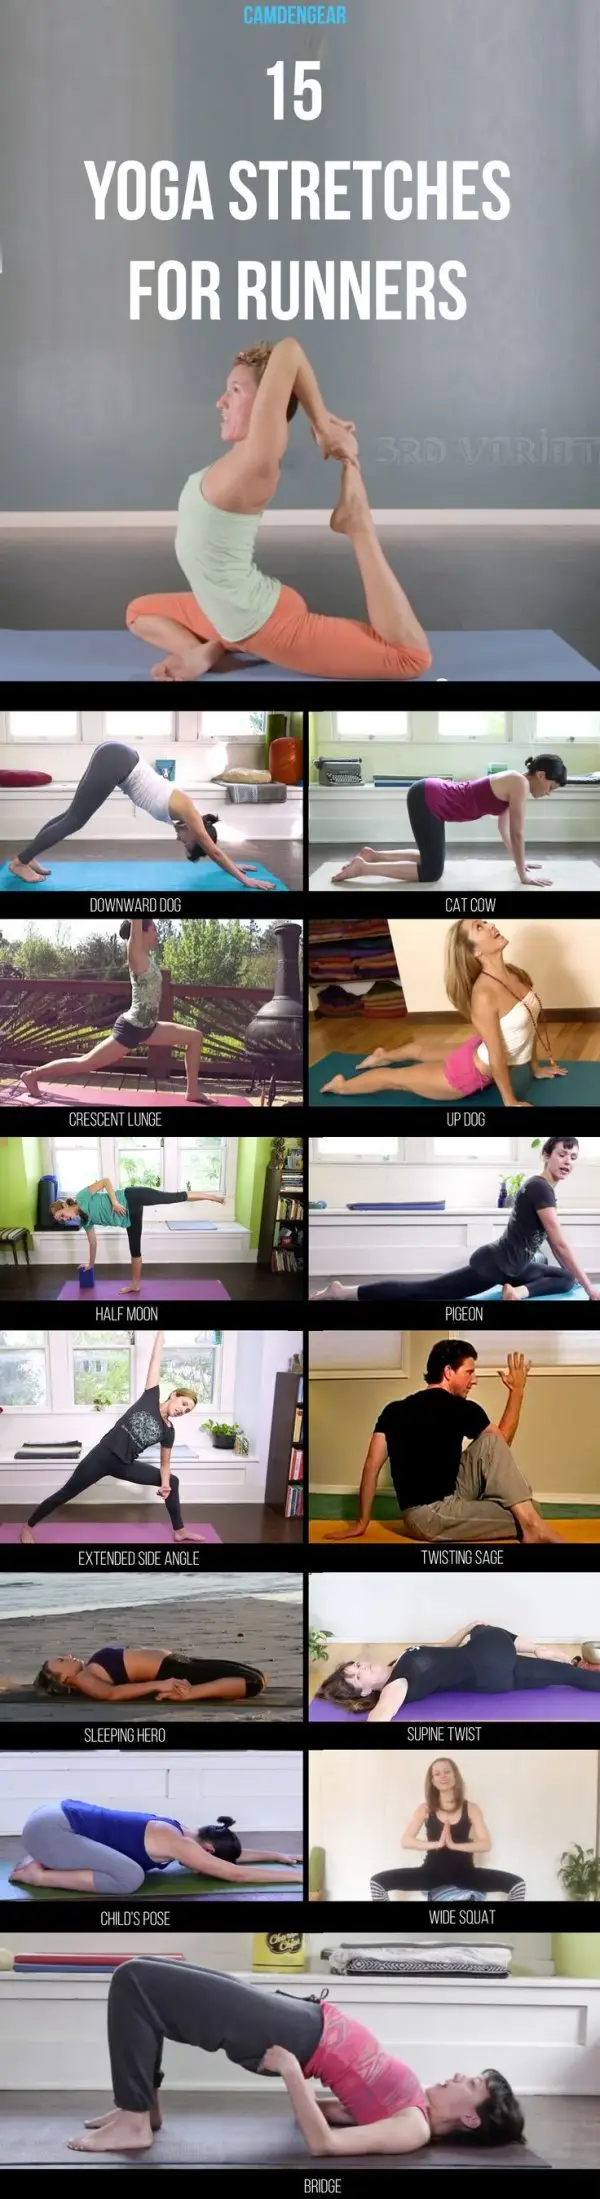 Yoga Stretches for Runners